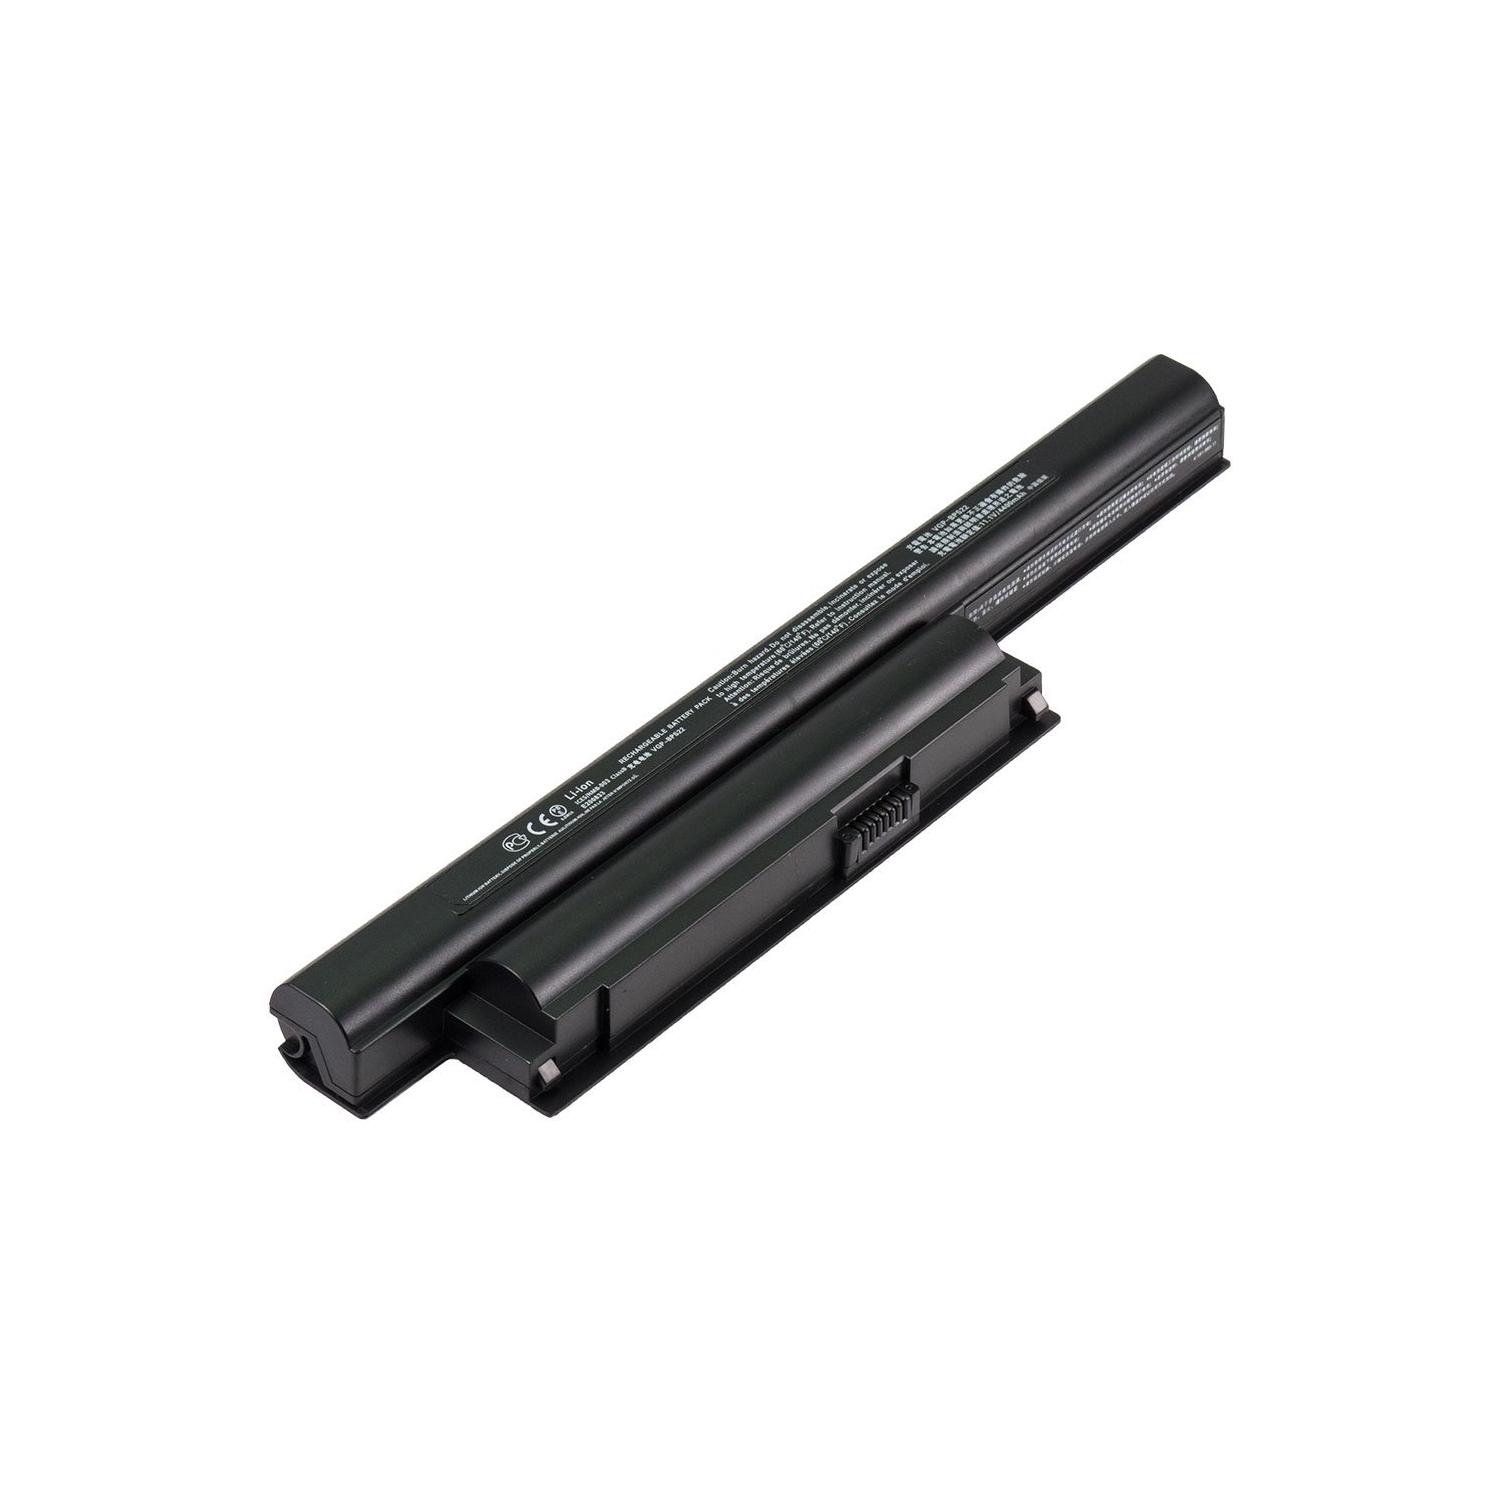 Laptop Battery Replacement for Sony VAIO VPC-EB2JFX/P, VGP-BPL22, VGP-BPS22, VGP-BPS22/A, VGP-BPS22A